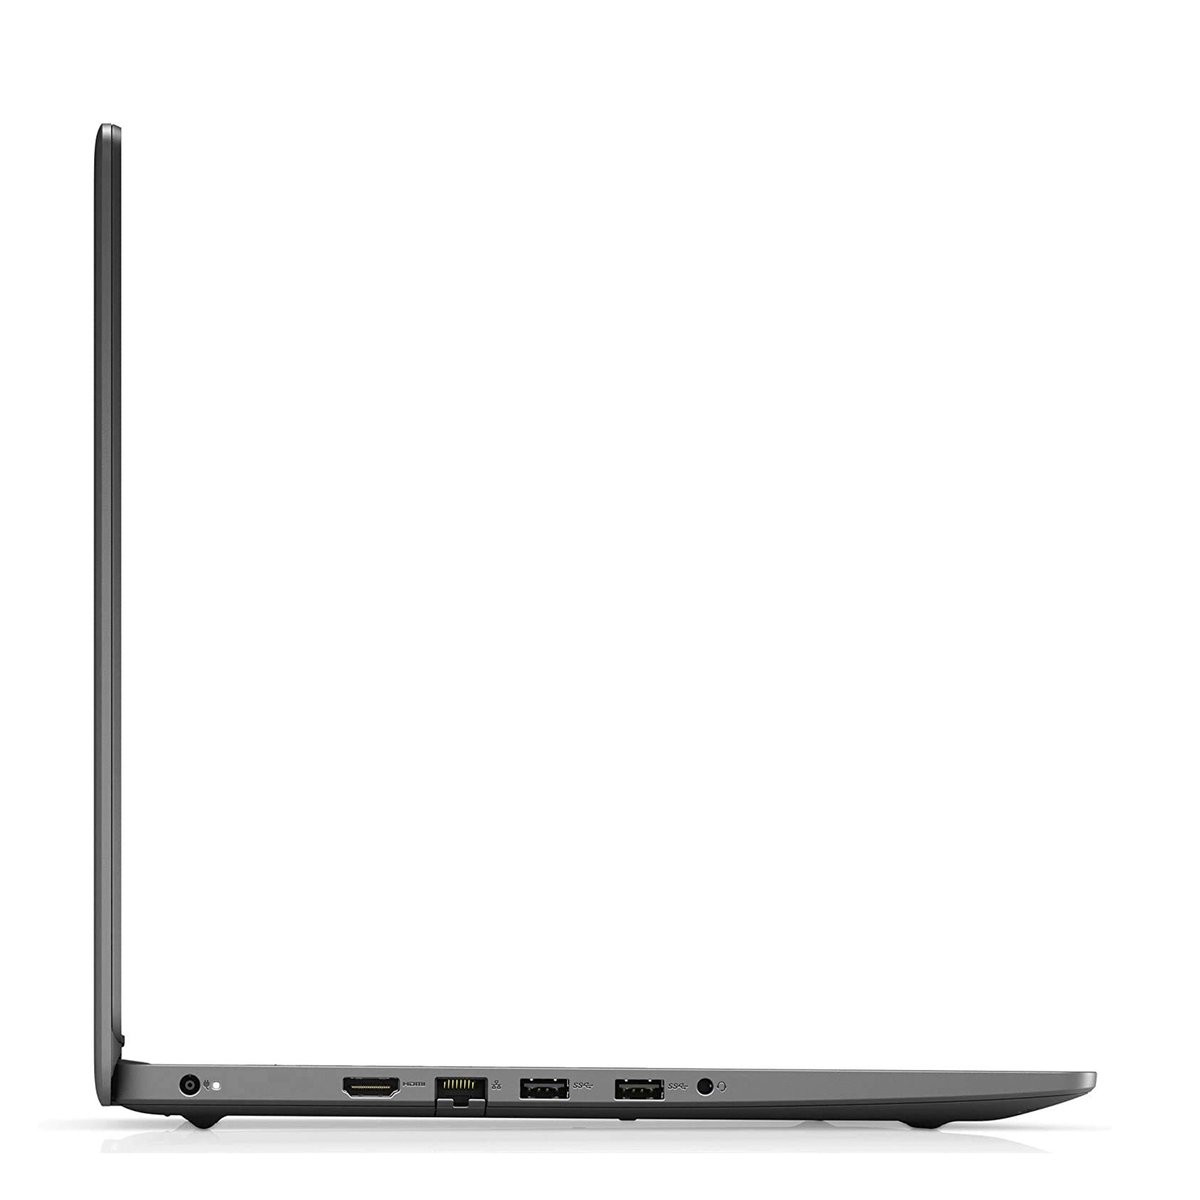 Dell Inspiron 3501 15.6-inch FHD Laptop,Core™ i3-1005G1 Processor, 4GBRAM, 1TB HDD,Intel® UHD Graphics with shared graphics , Win10 15.6inch FHD ,Silver